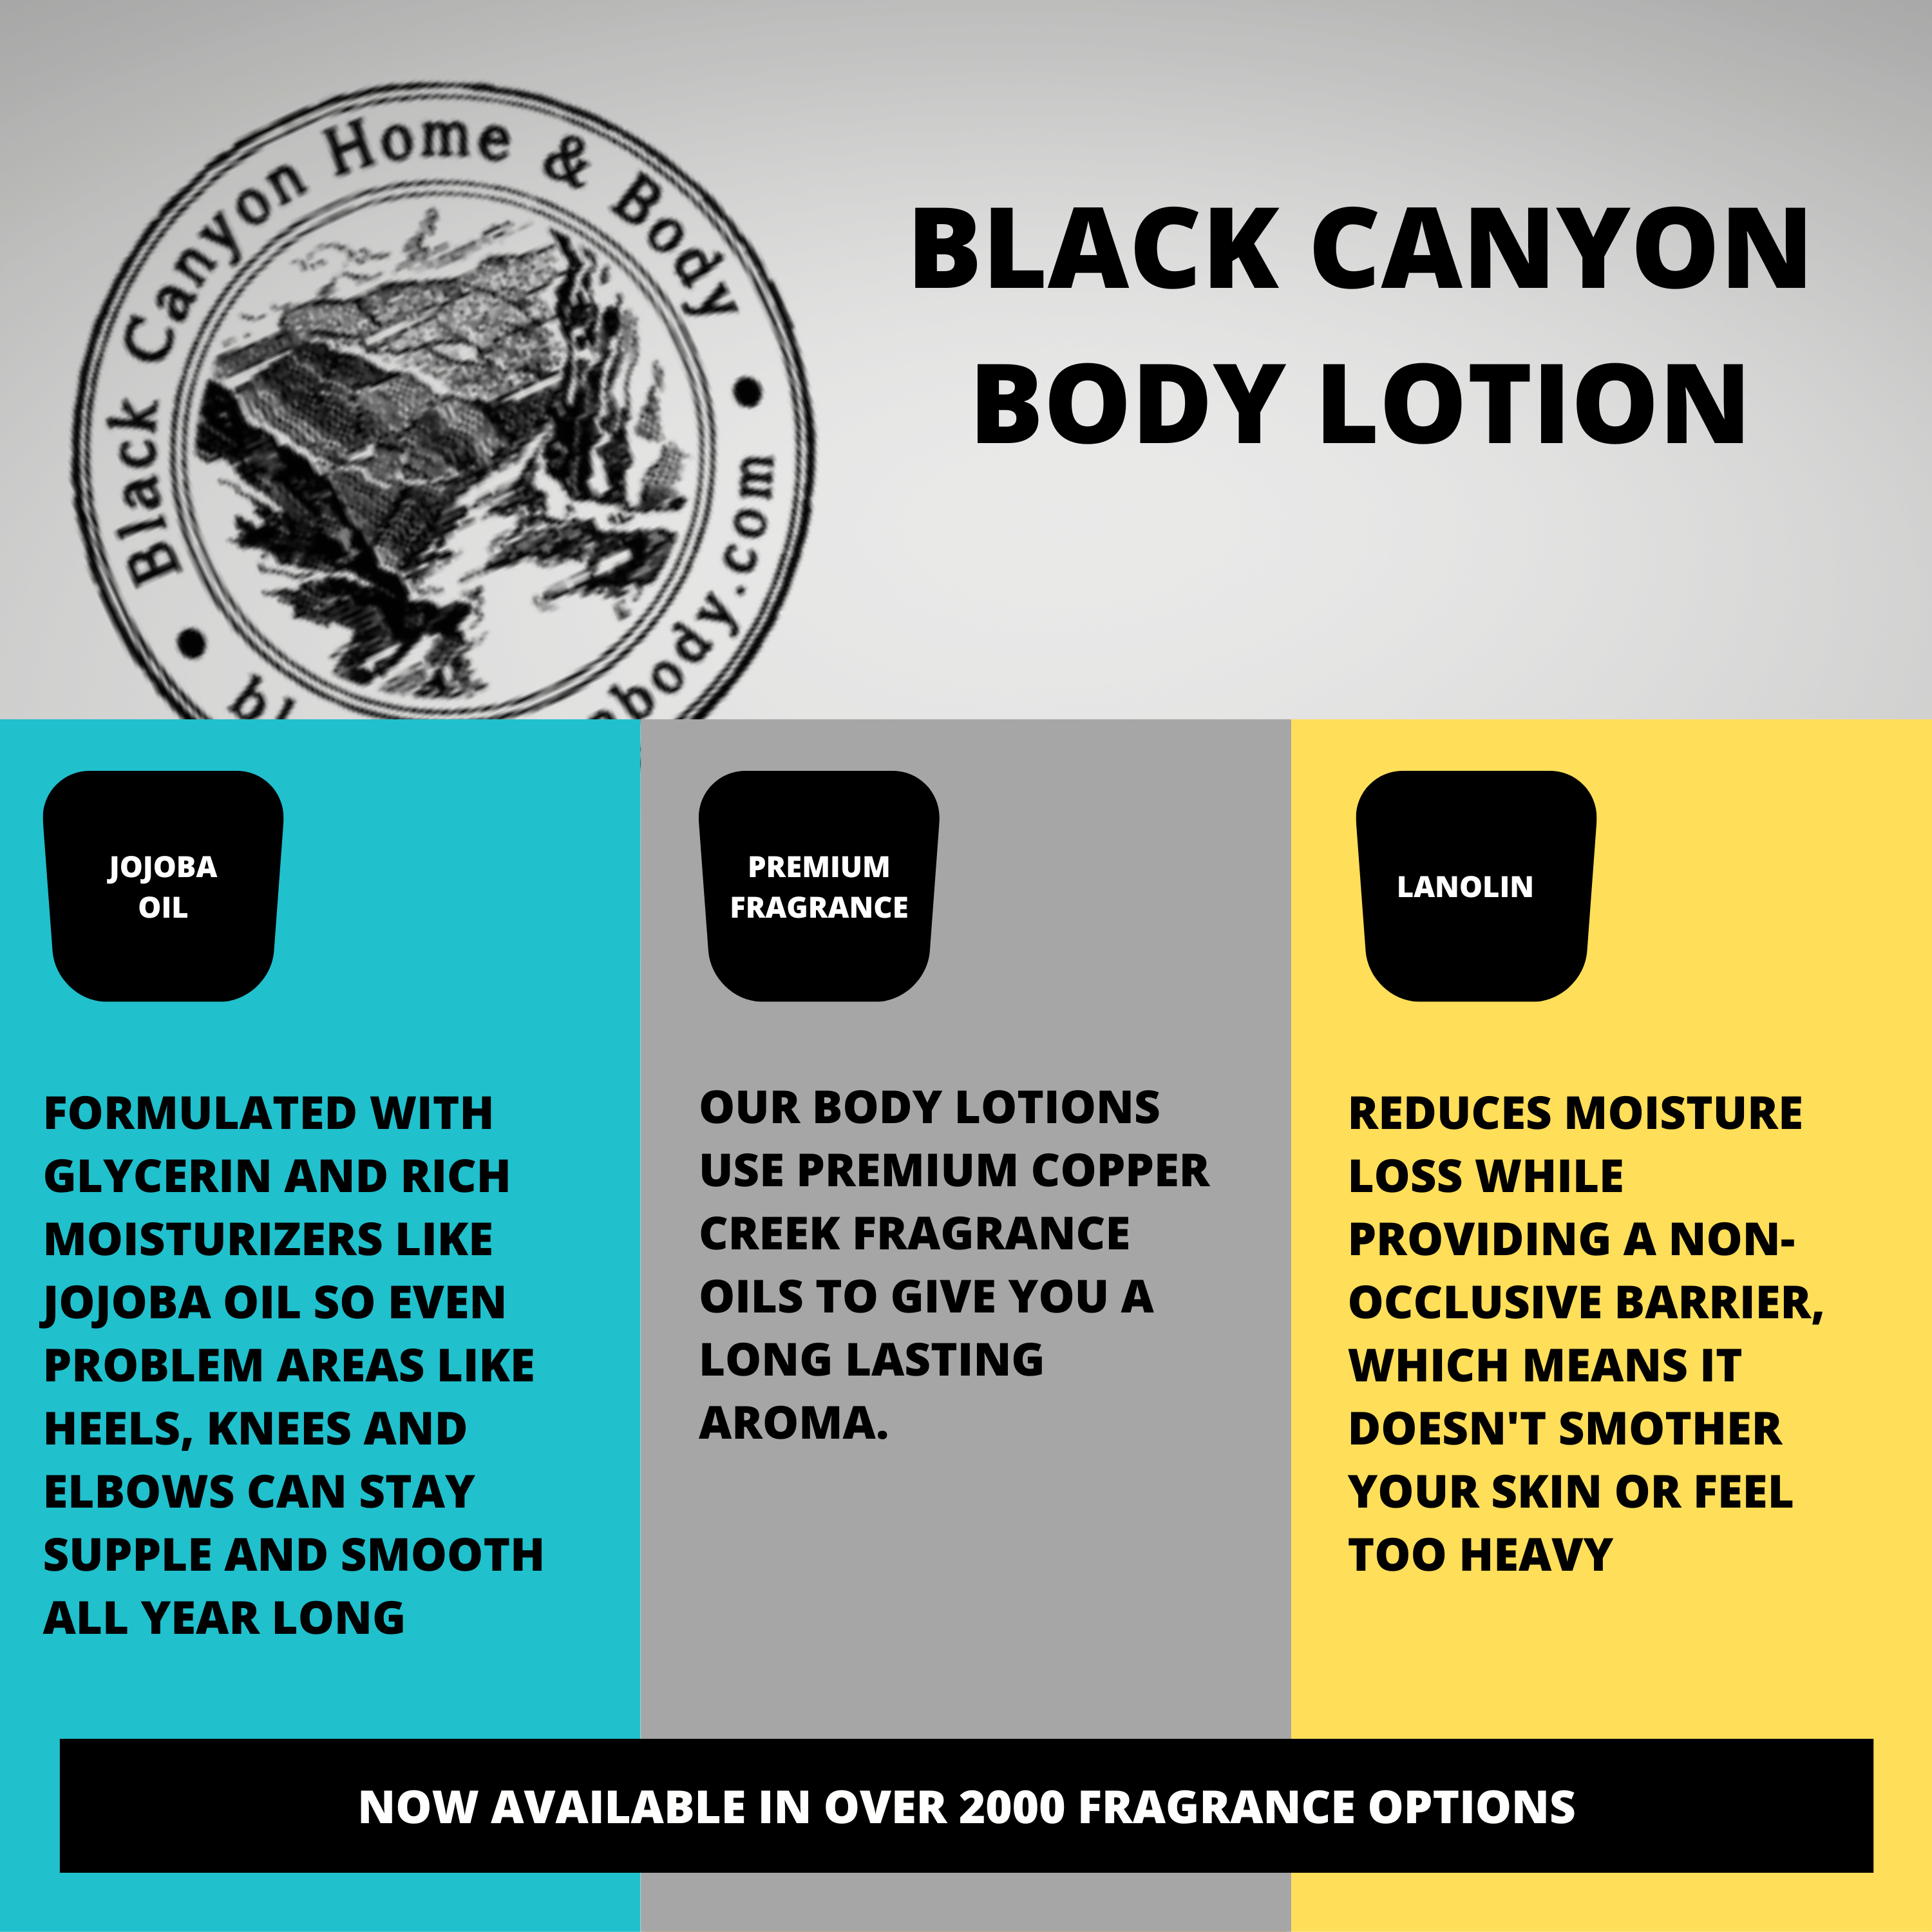 Black Canyon Bergamot & Asiatic Lily Scented Luxury Body Lotion with Lanolin and Jojoba Oil